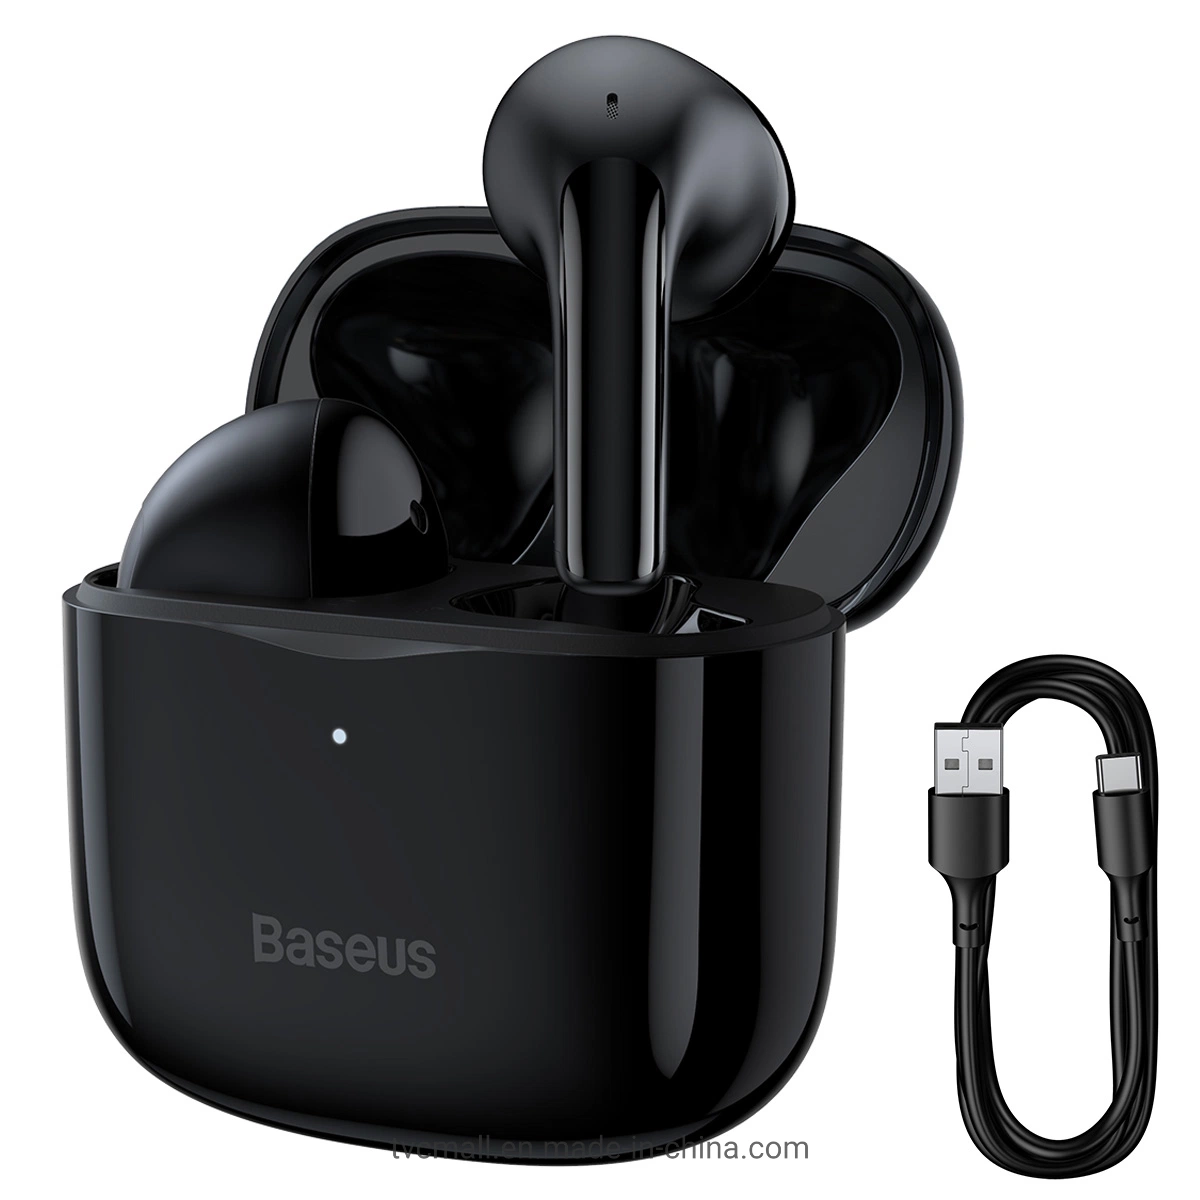 Baseus Bowie E3 Series Tws Bluetooth 5.0 Headset Wireless Earphone Stereo Sound Earbud Sports Headphone with Charging Case - Black